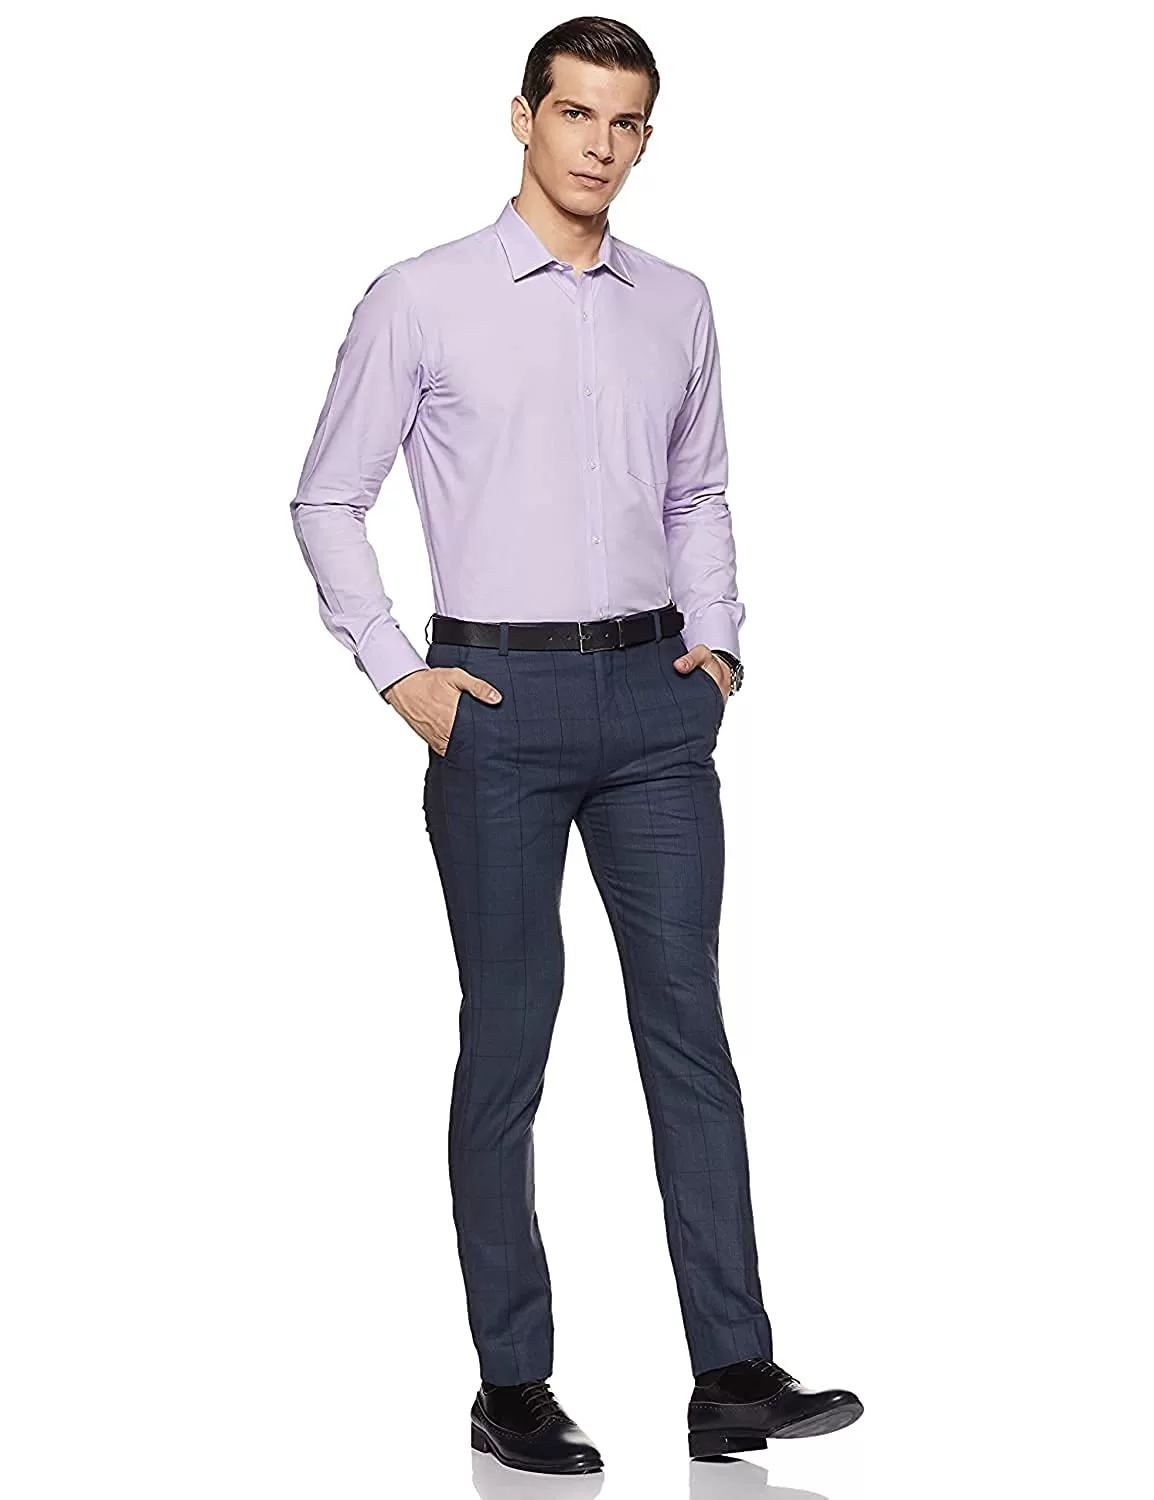 Which colour shirt goes well with light grey trousers? - Quora